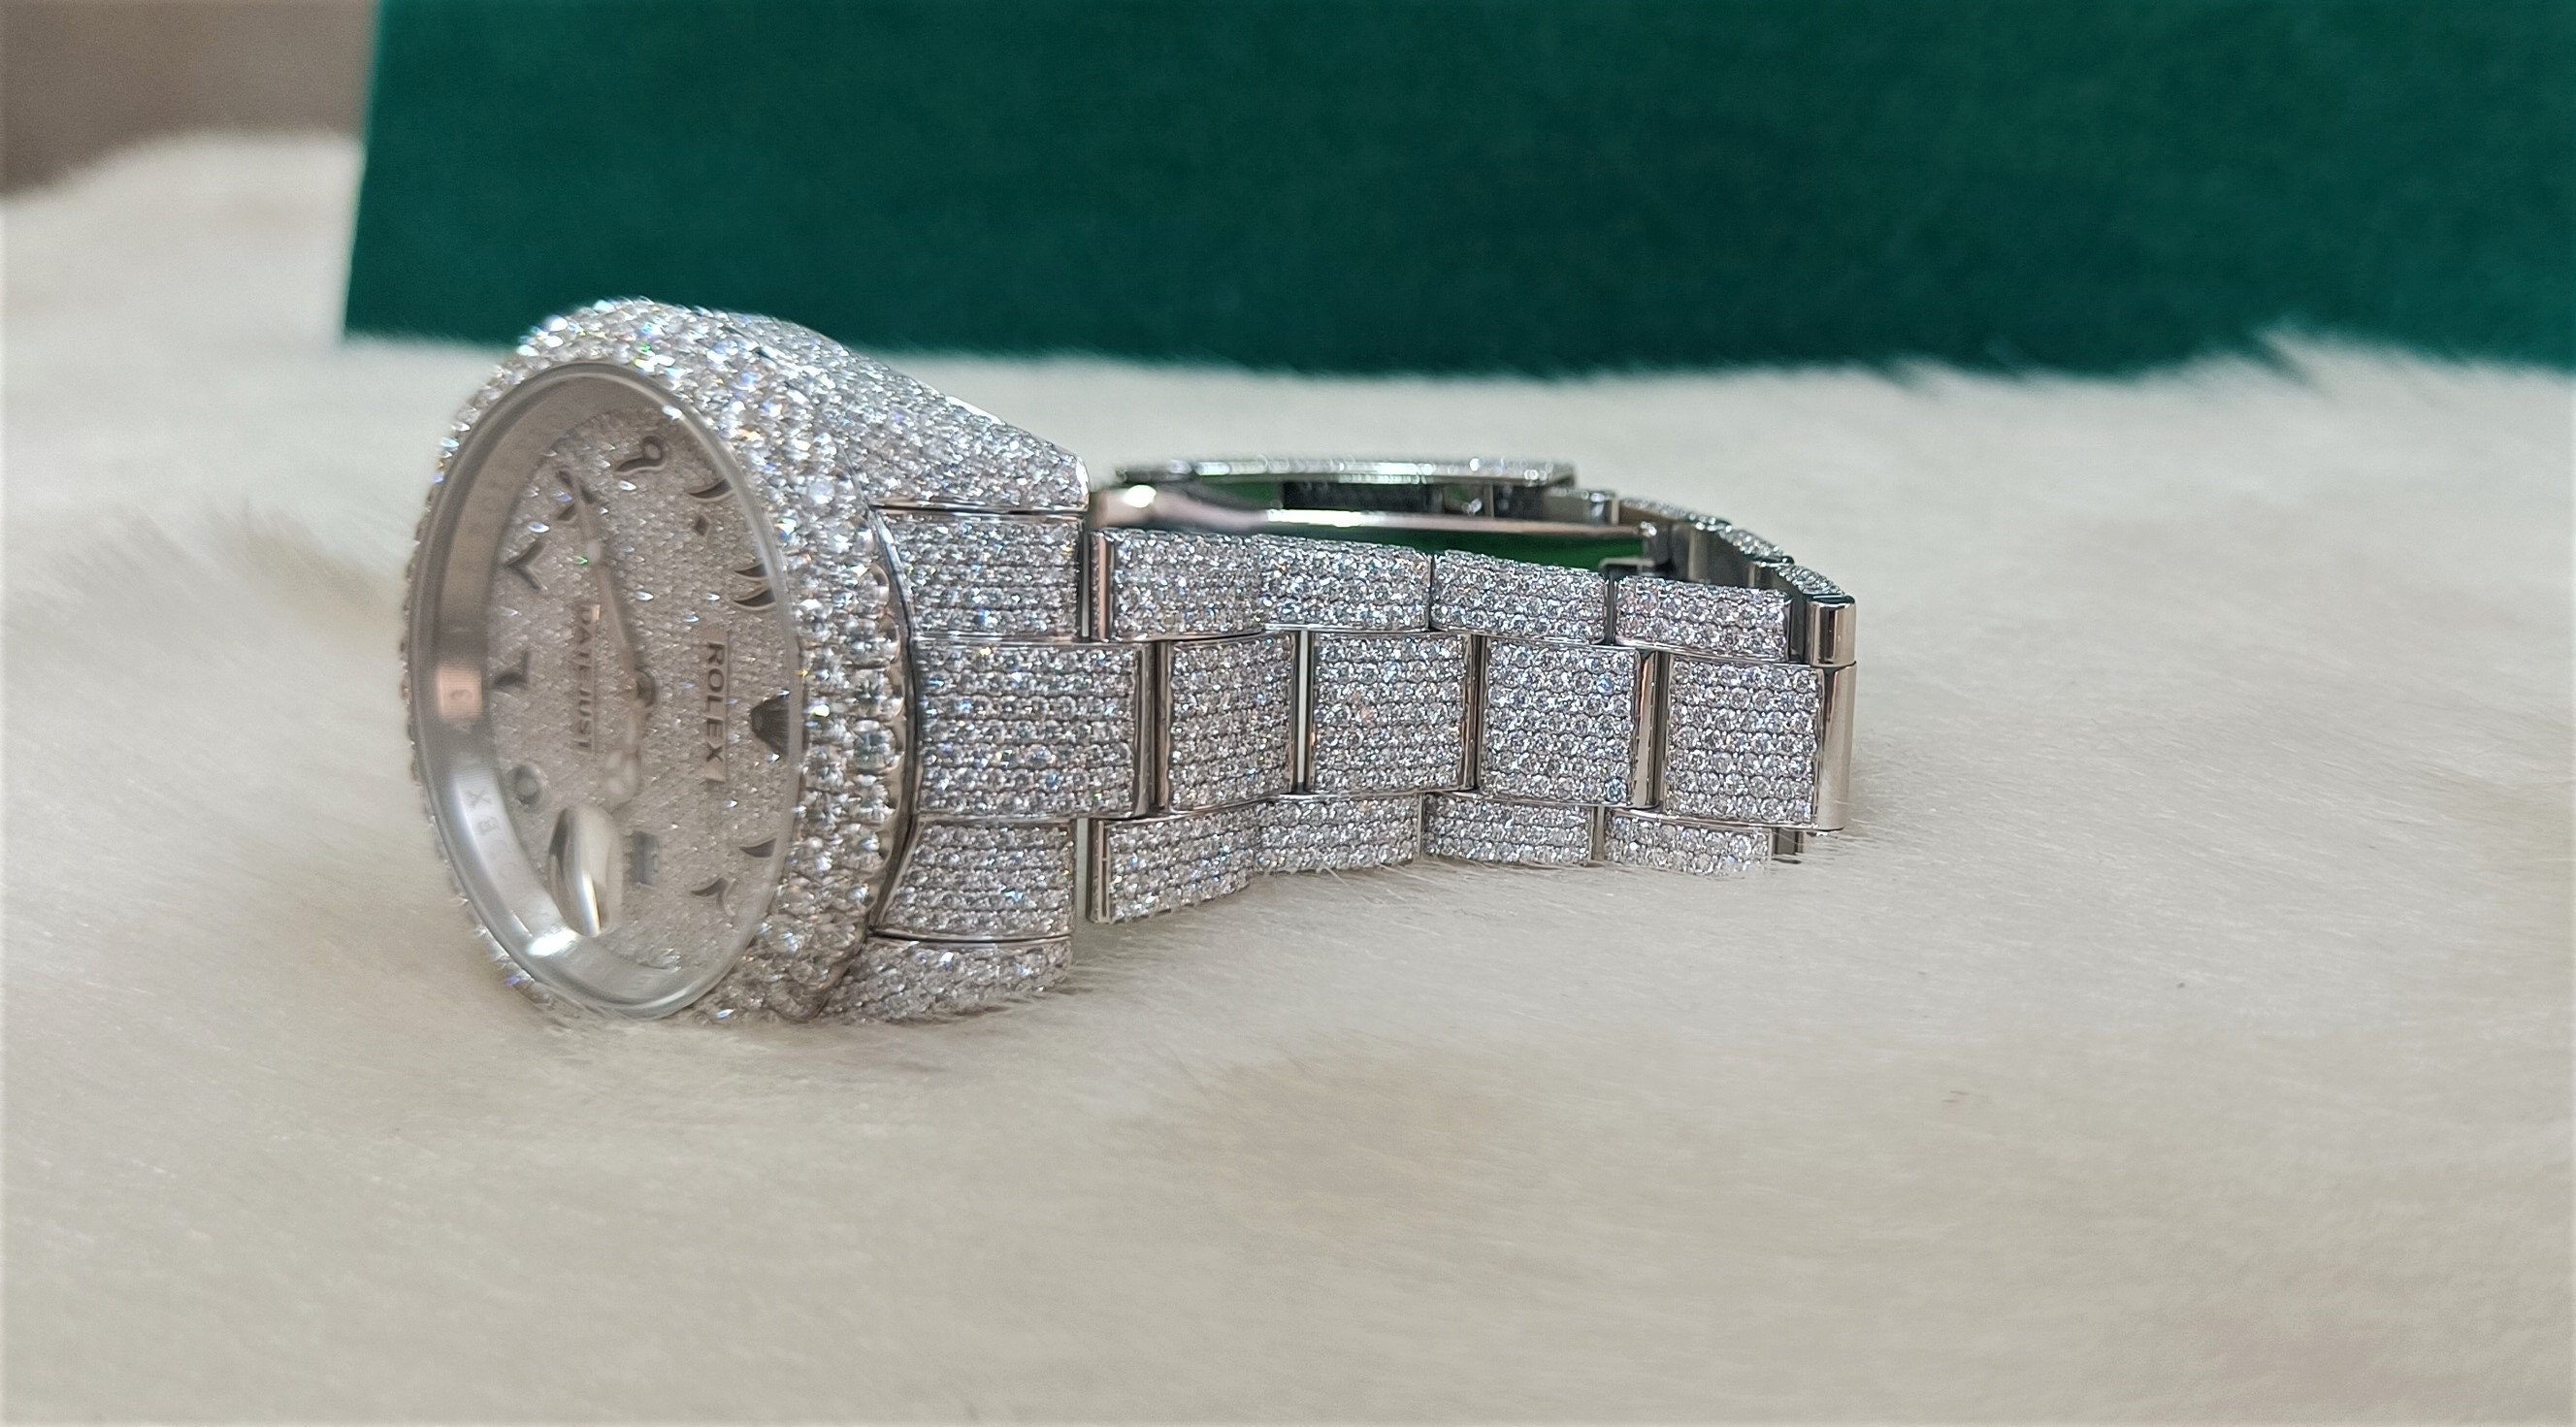 VVS Moissanite Diamond Watch Fully Iced Out Date Just Watch - Etsy